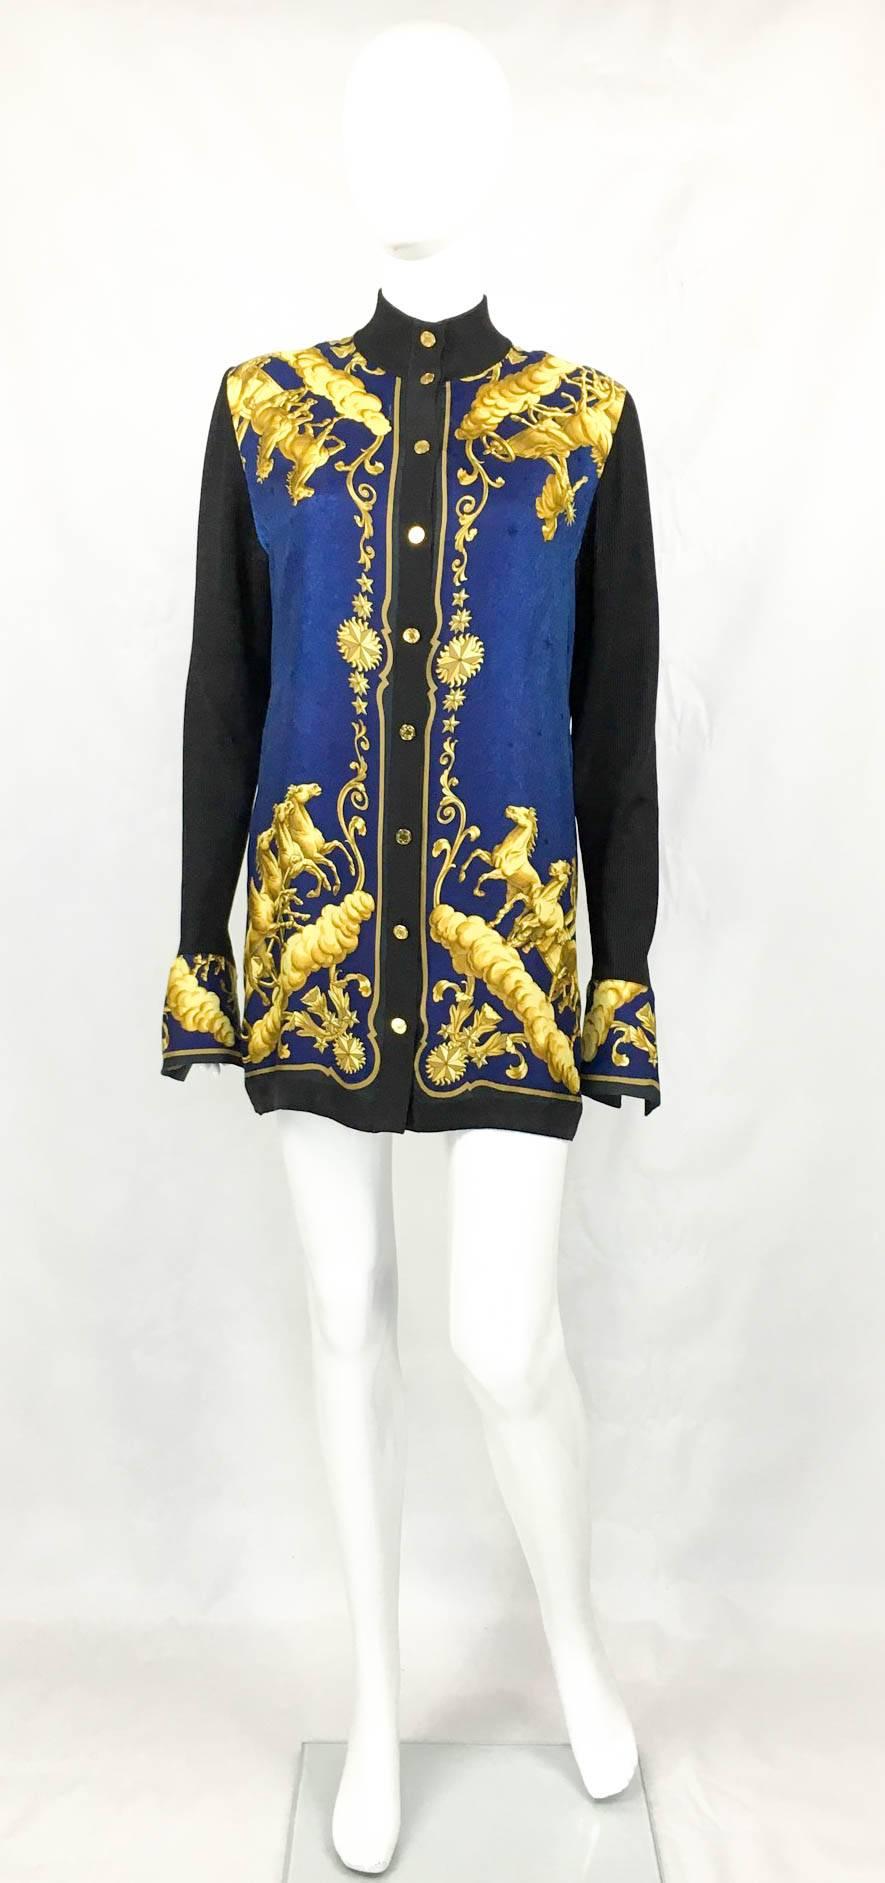 Stunning Vintage Hermes Silk Shirt Jacket. This beautiful piece by Hermes can be worn as a shirt or a jacket, as well as a mini-dress. The Cosmo design by Philippe Ledoux has a mythological motif and it was originally released as a scarf in 1966. In